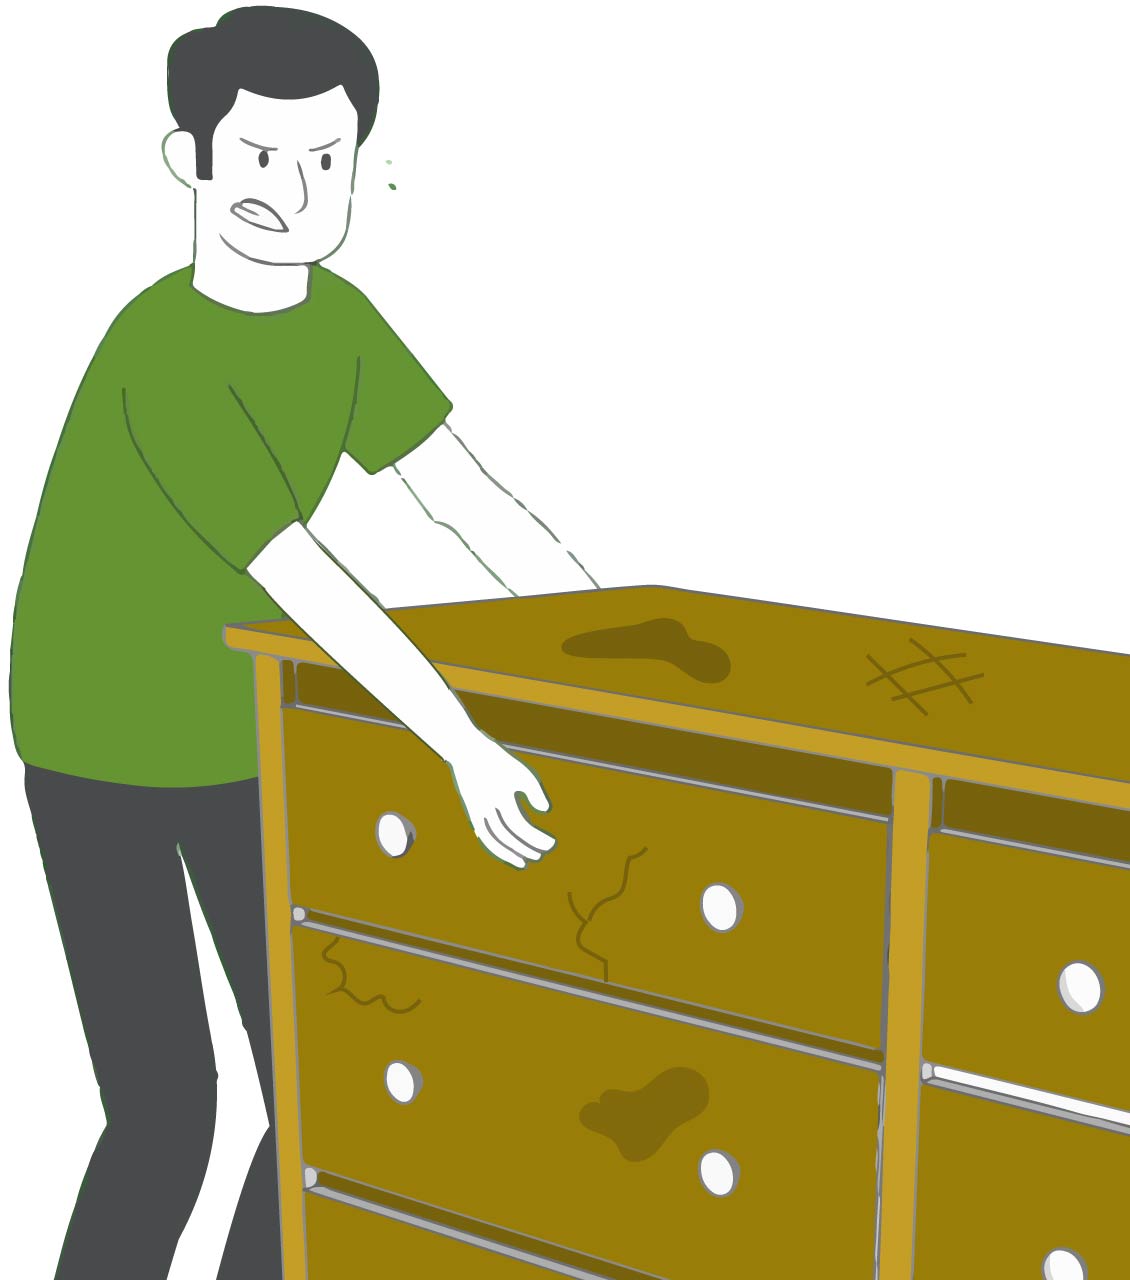 Stress-free Syracuse Furniture Removal & Disposal Services